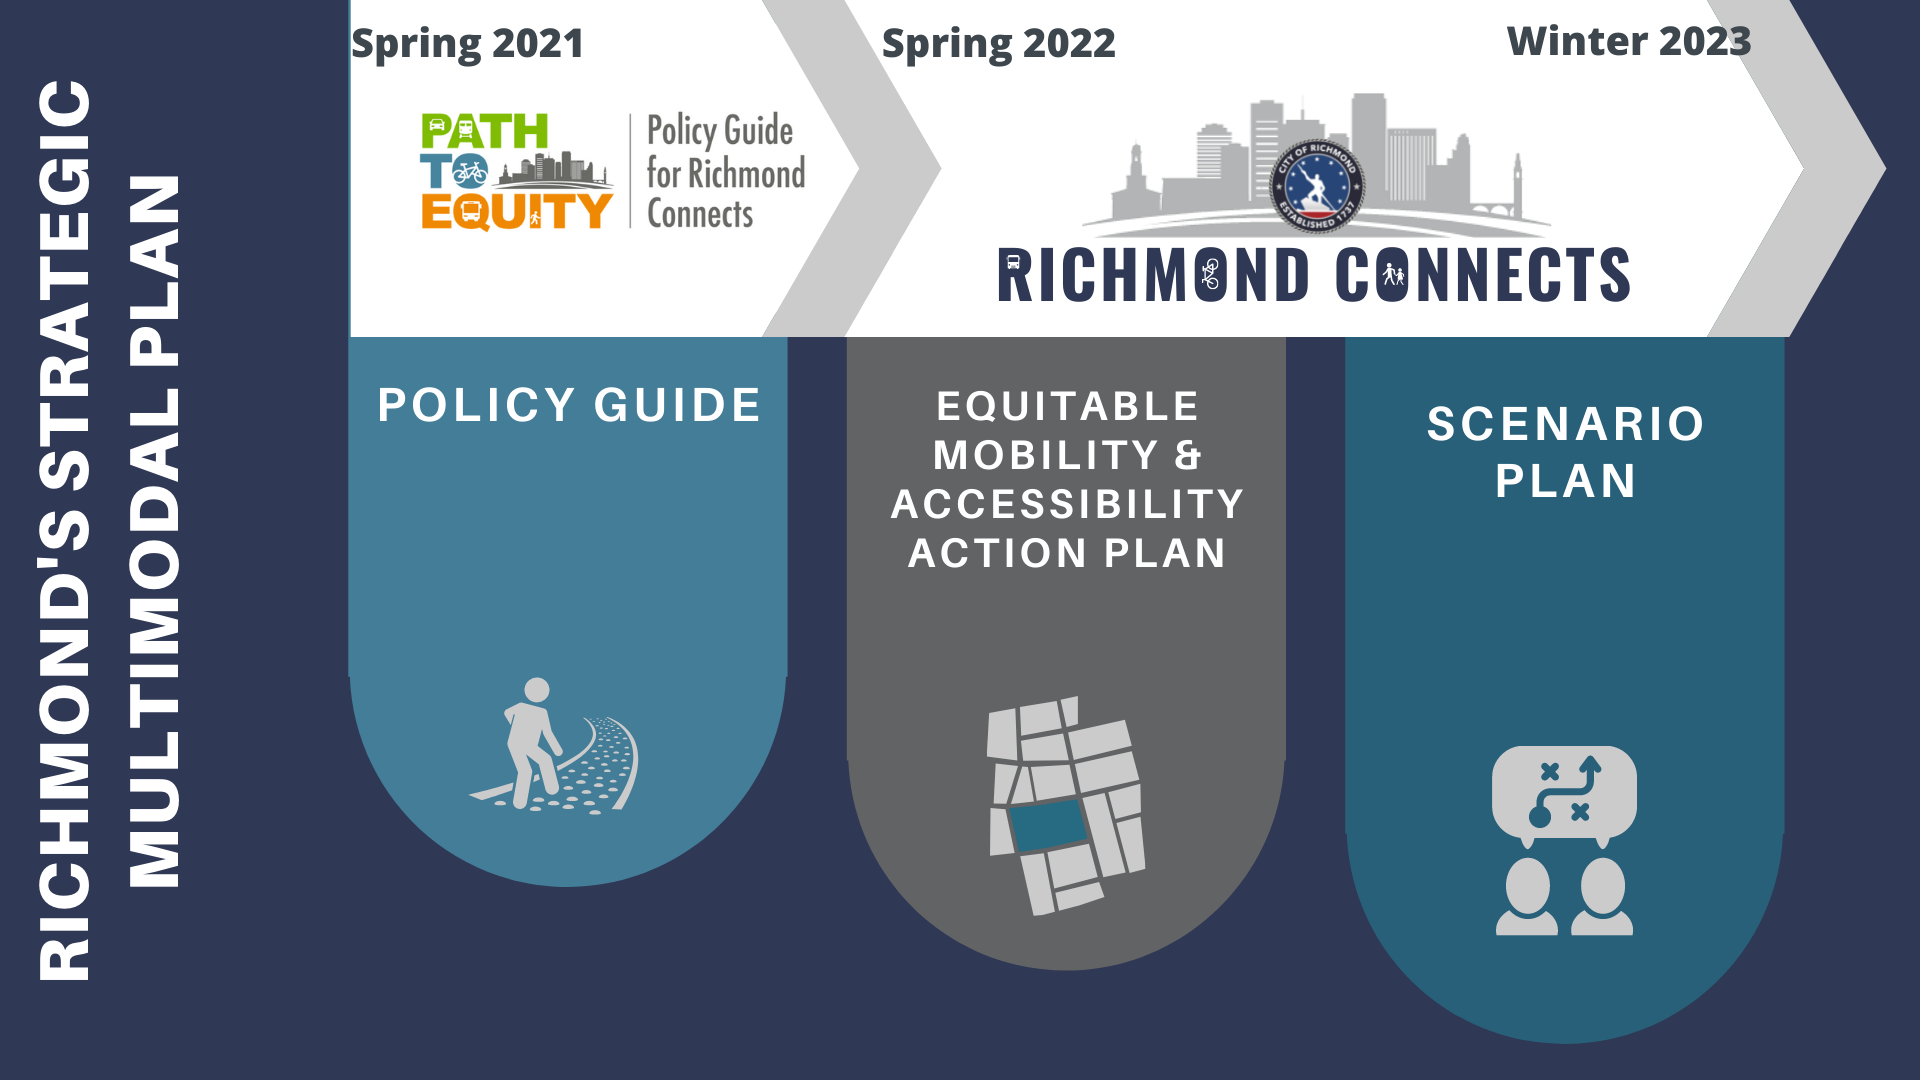 This image contains a timeline starting in Spring 2021 with the policy guide being completed in Spring 2022, and the Richmond Connects process kicking off in Spring 2022 and ending in Winter 2023.